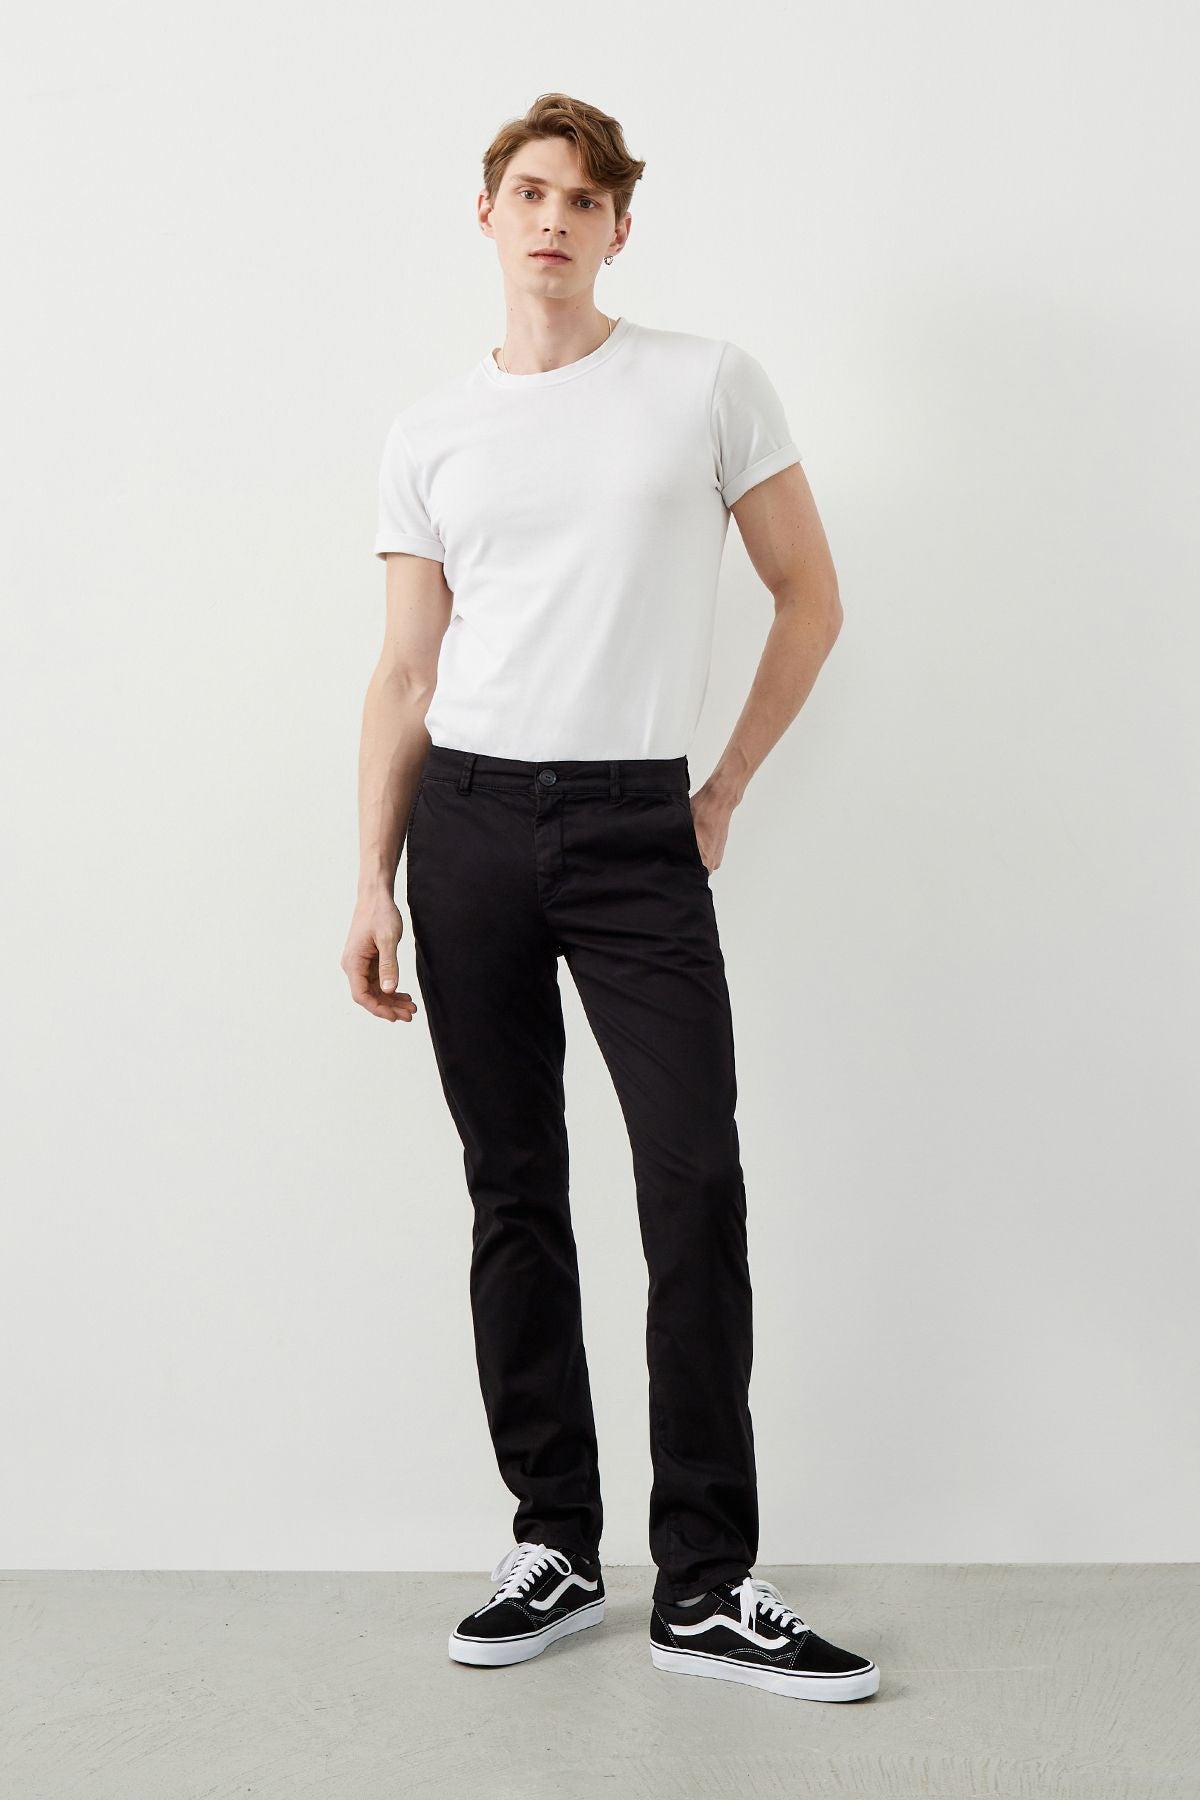 Man wearing sleek black chinos and white classic cotton t-shit from Ra Denim Collection, showcasing modern style.